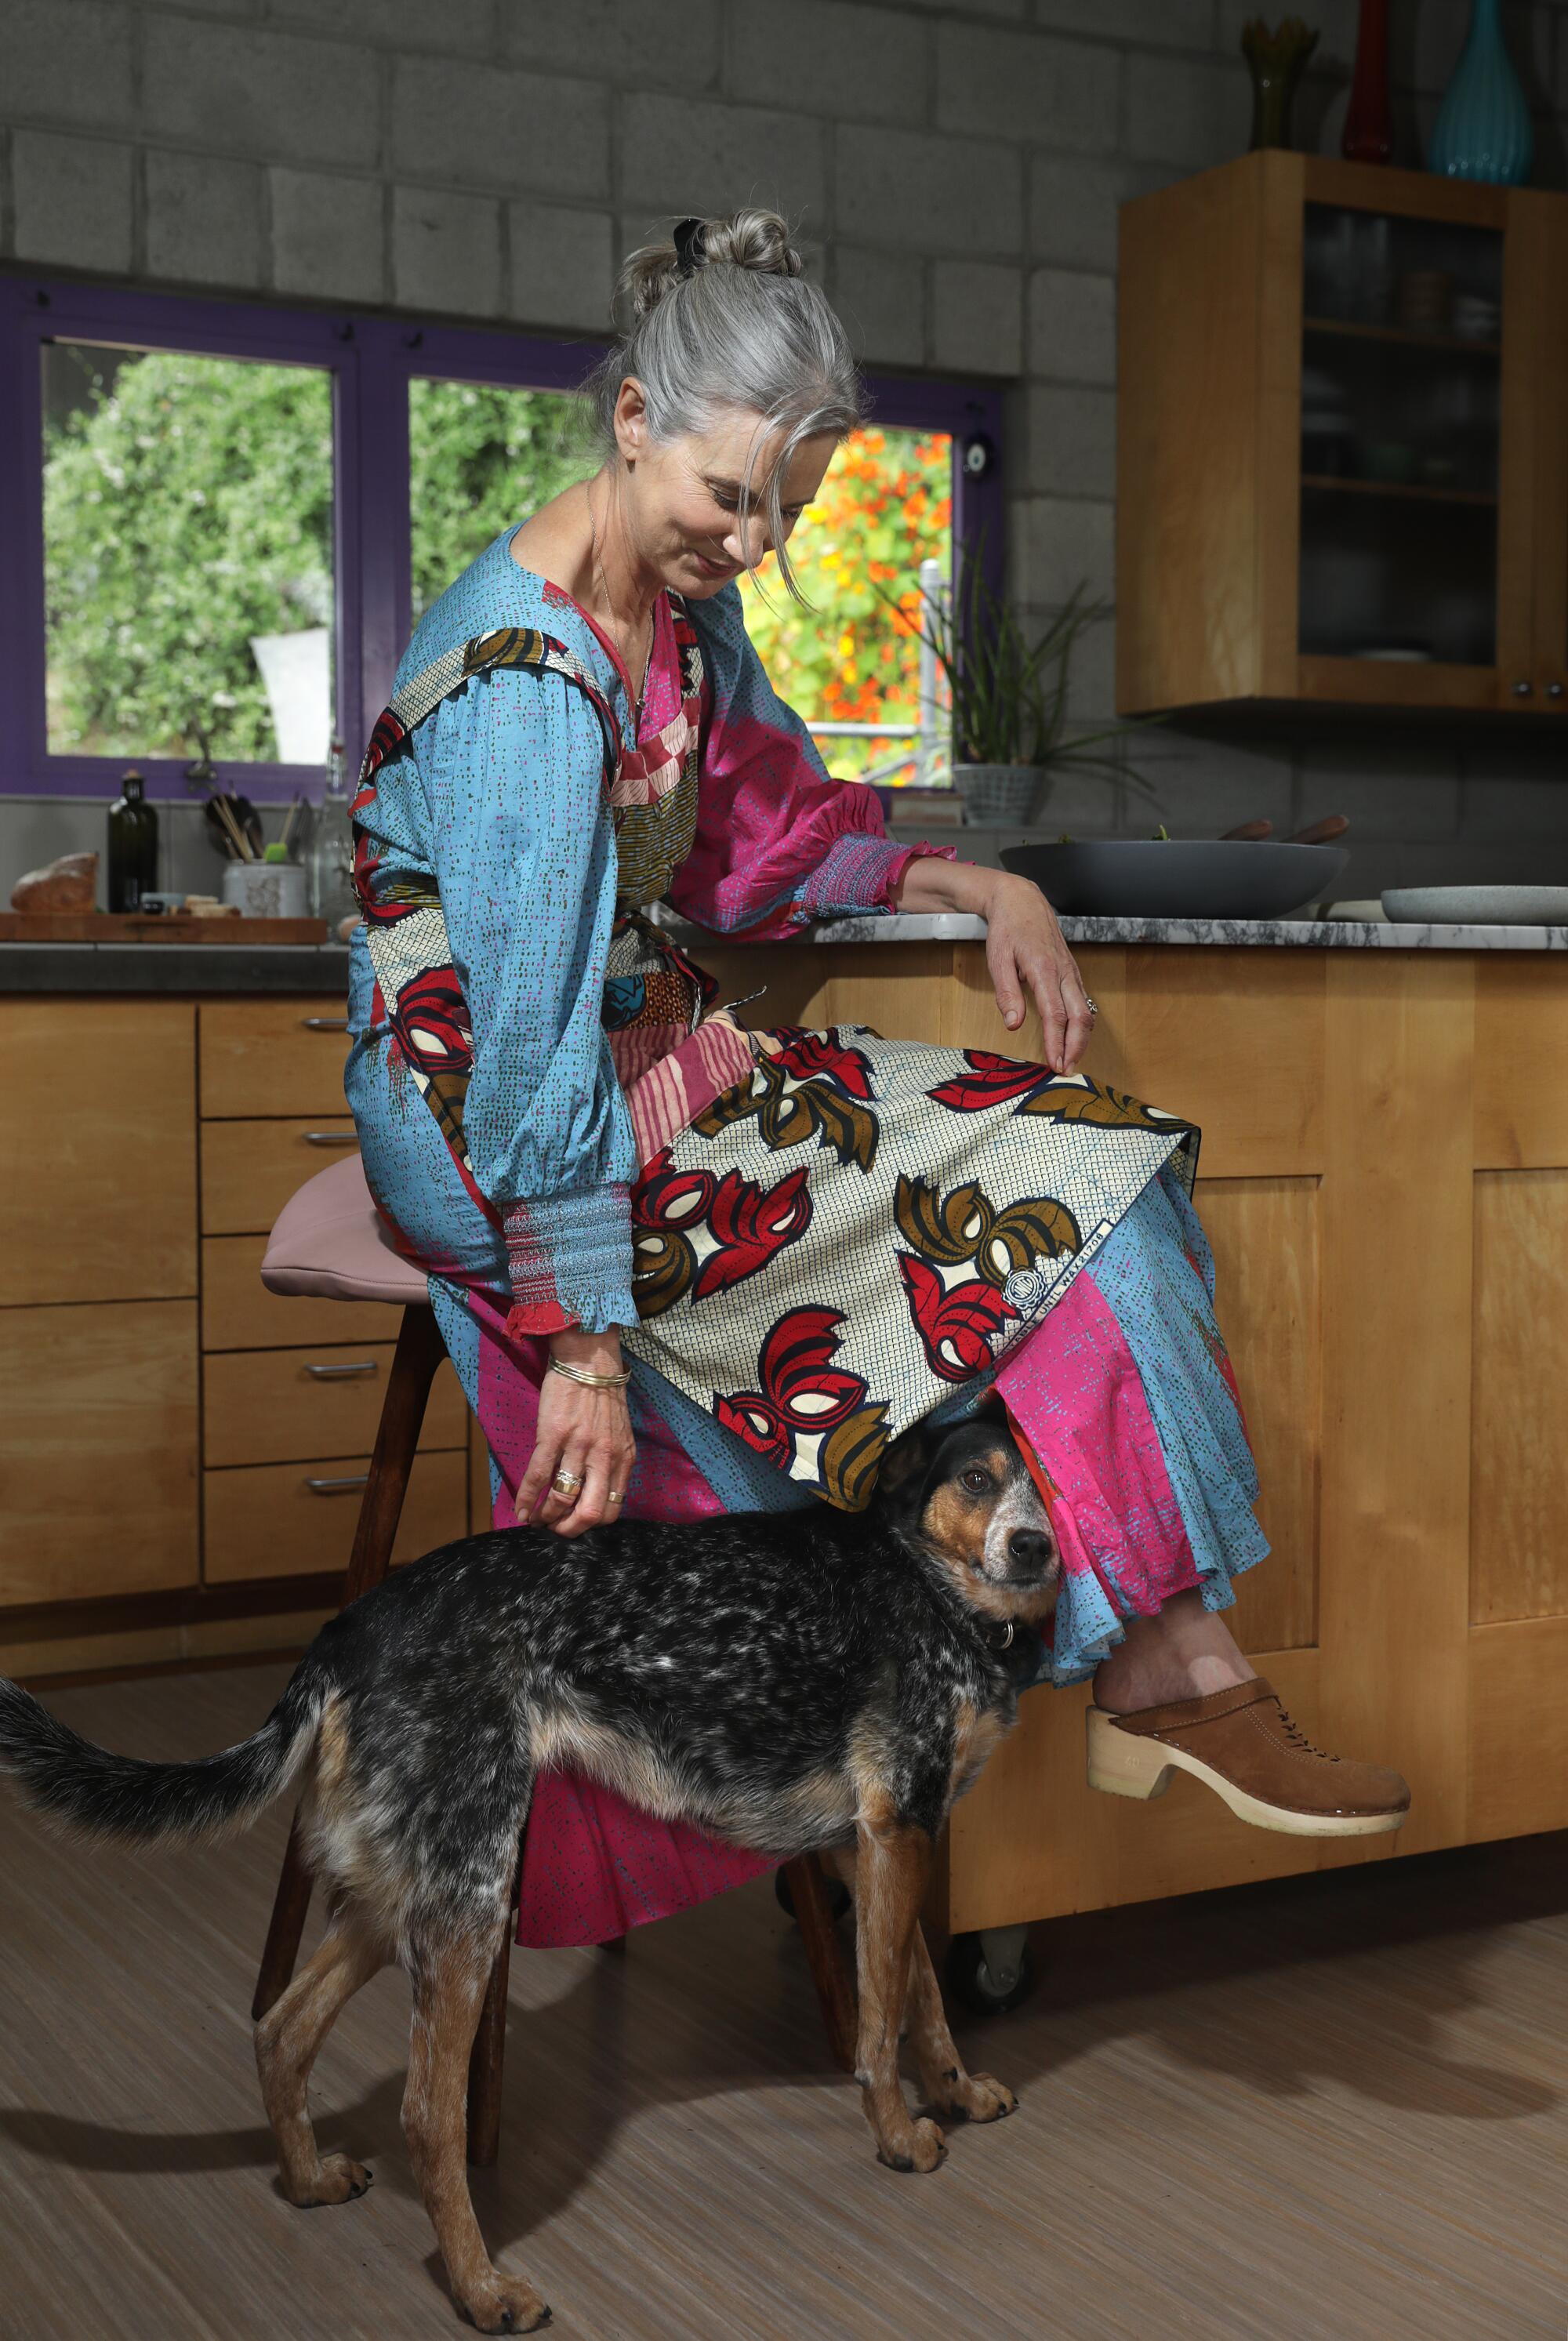 A woman seated at a kitchen counter bends down to pet her dog.